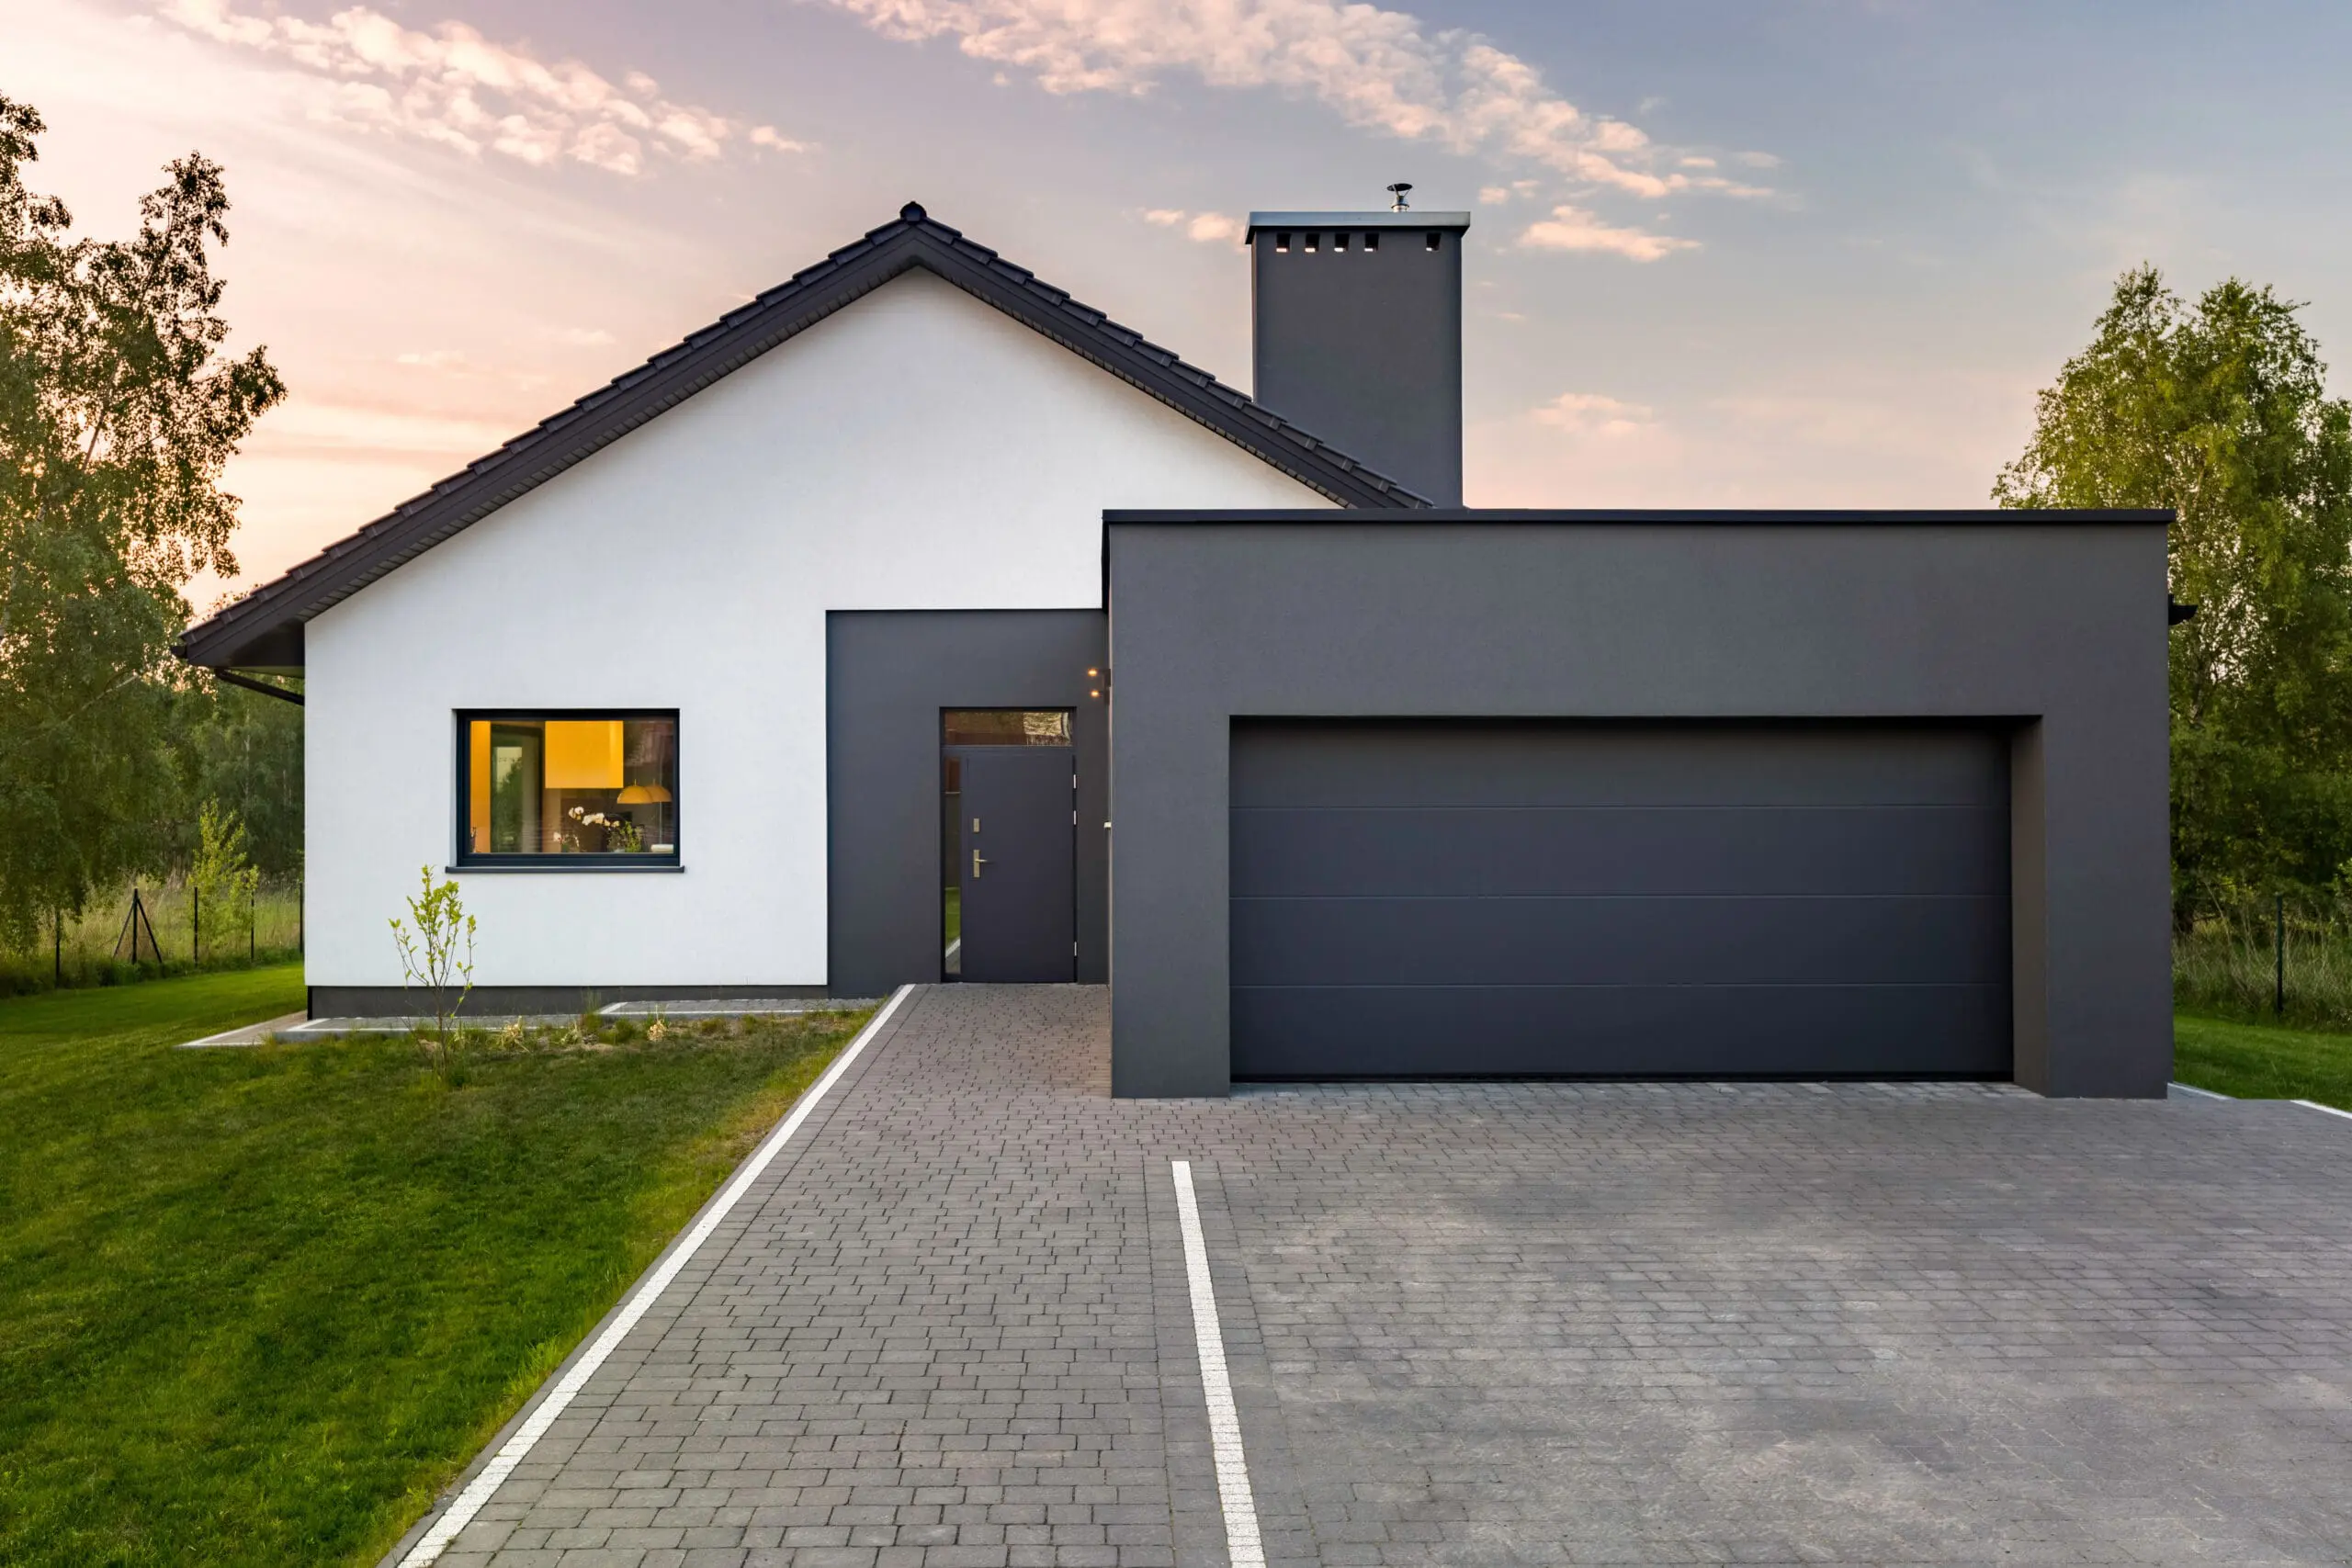 Modern,House,With,Garage,And,Green,Lawn,,Exterior,View